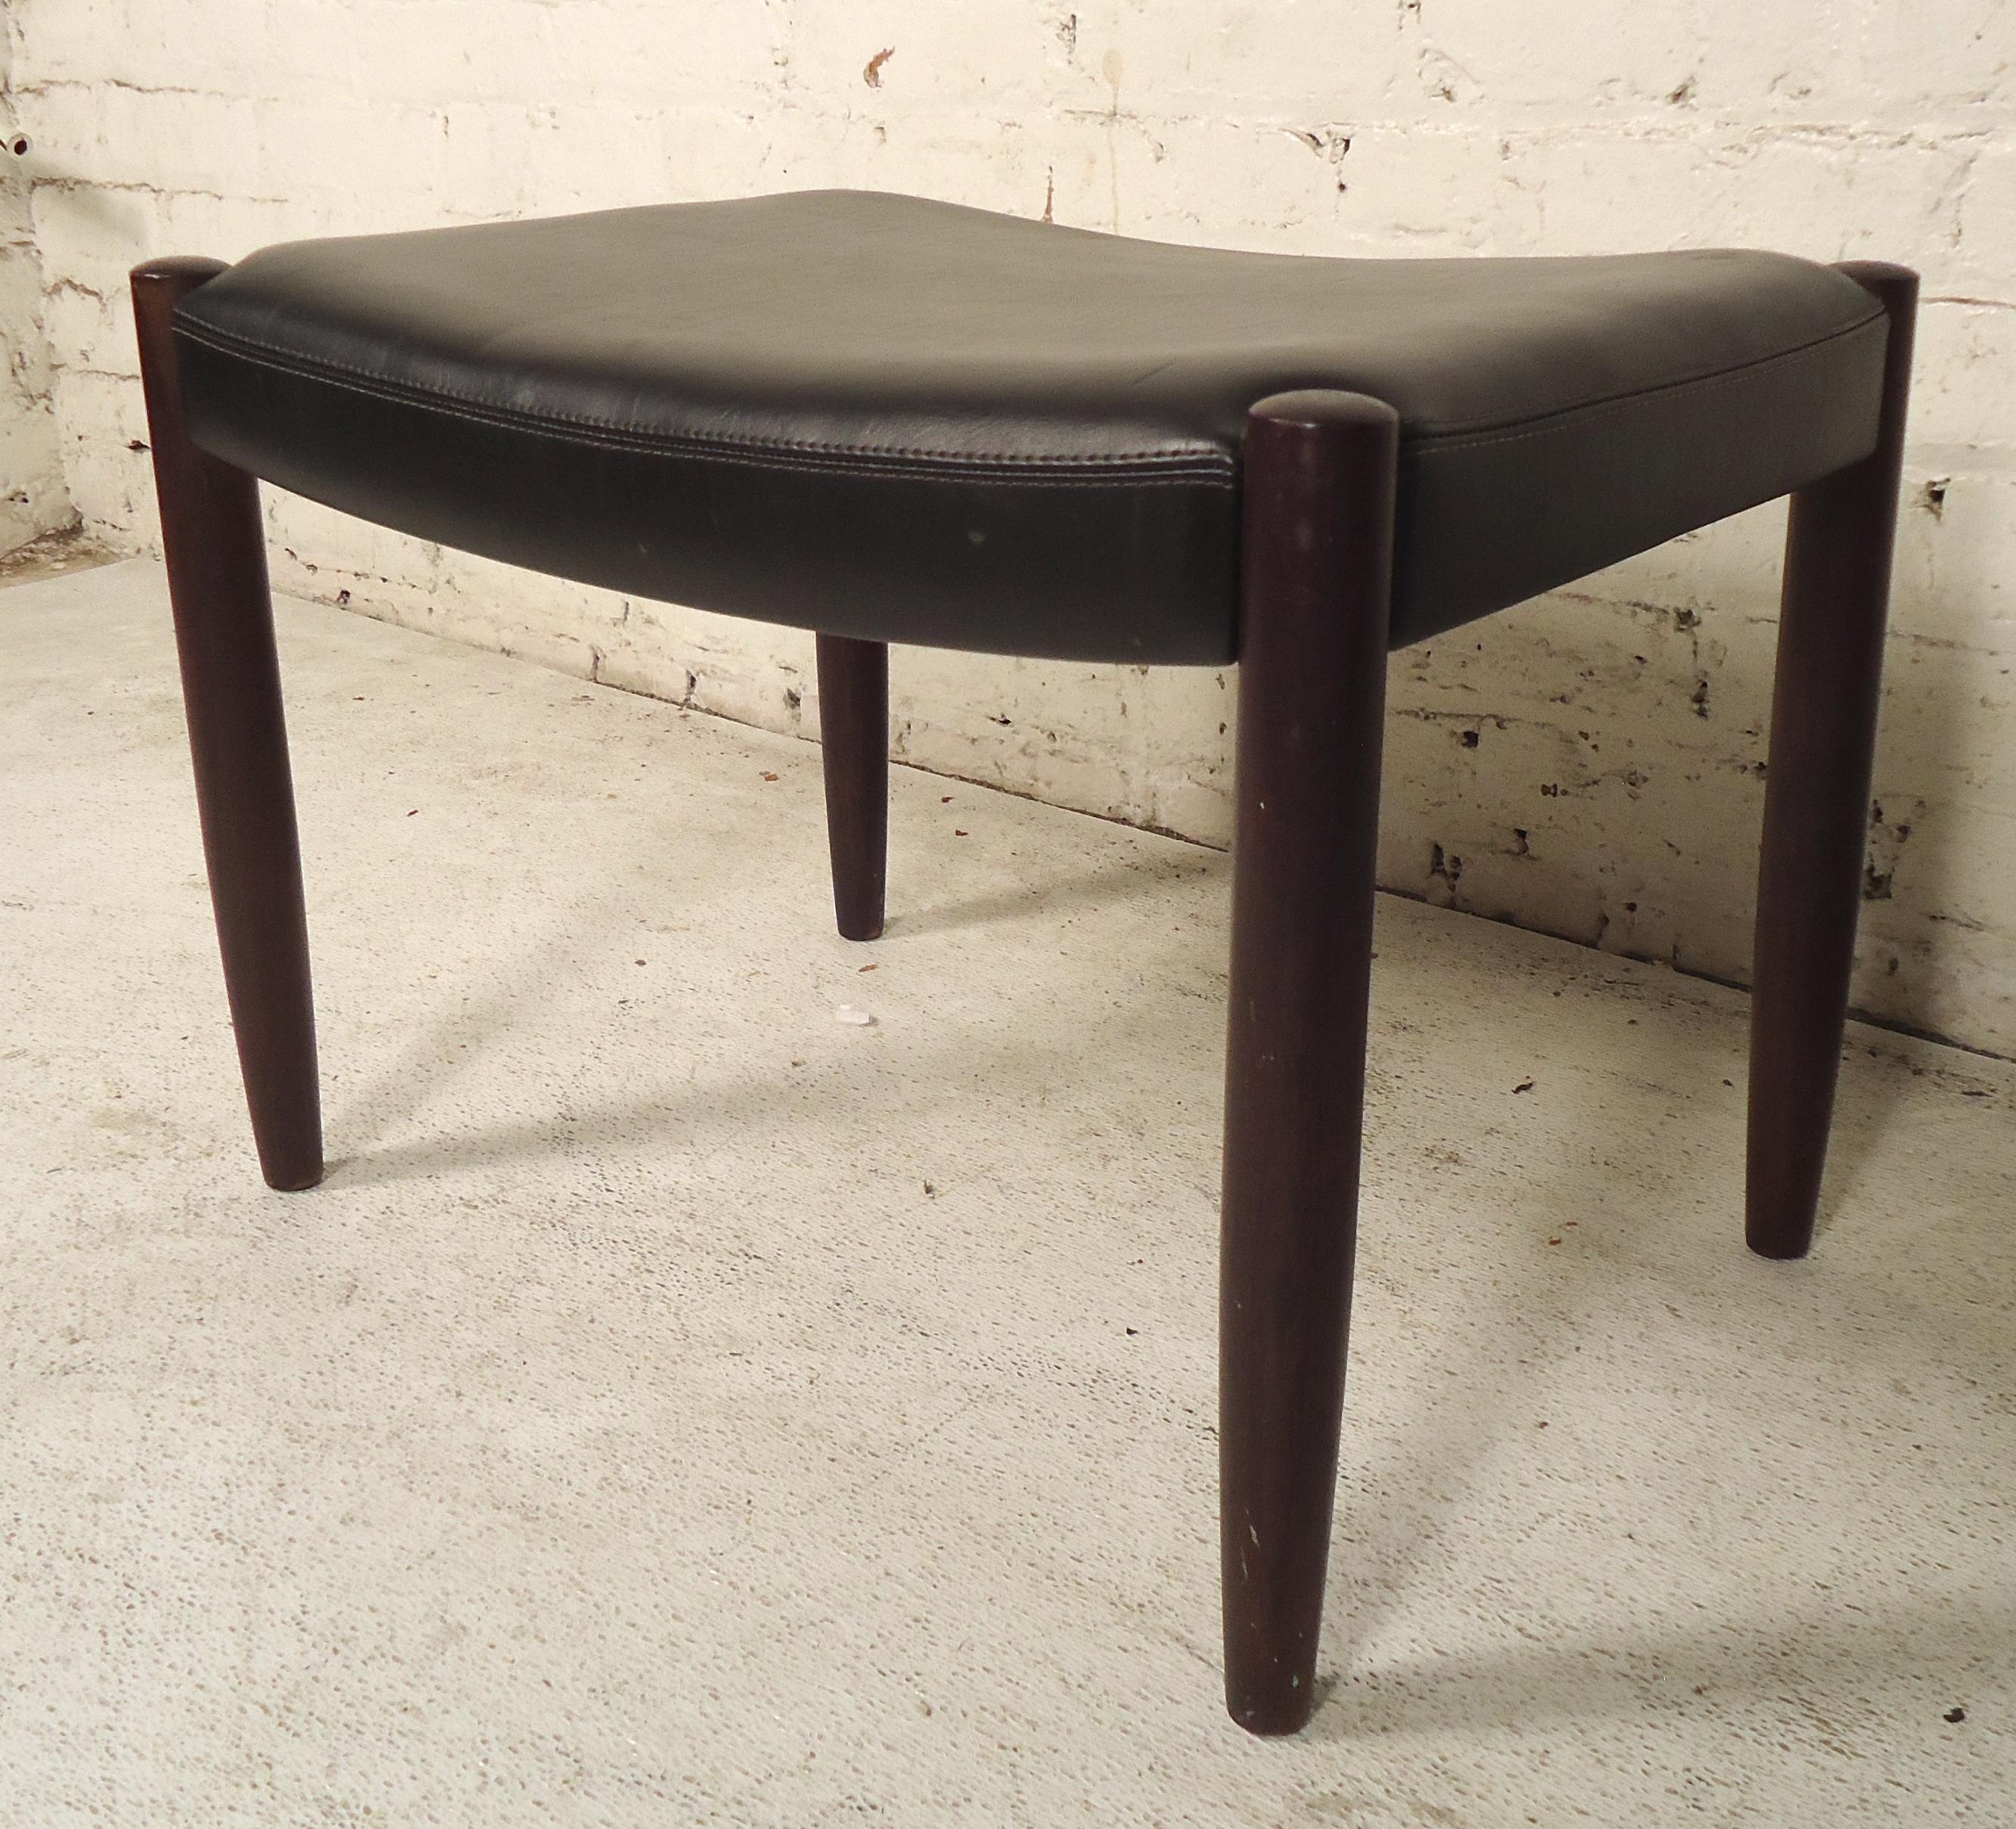 Small vintage modern style stool with tapered legs. Great for living room or office.

(Please confirm item location - NY or NJ - with dealer).
 